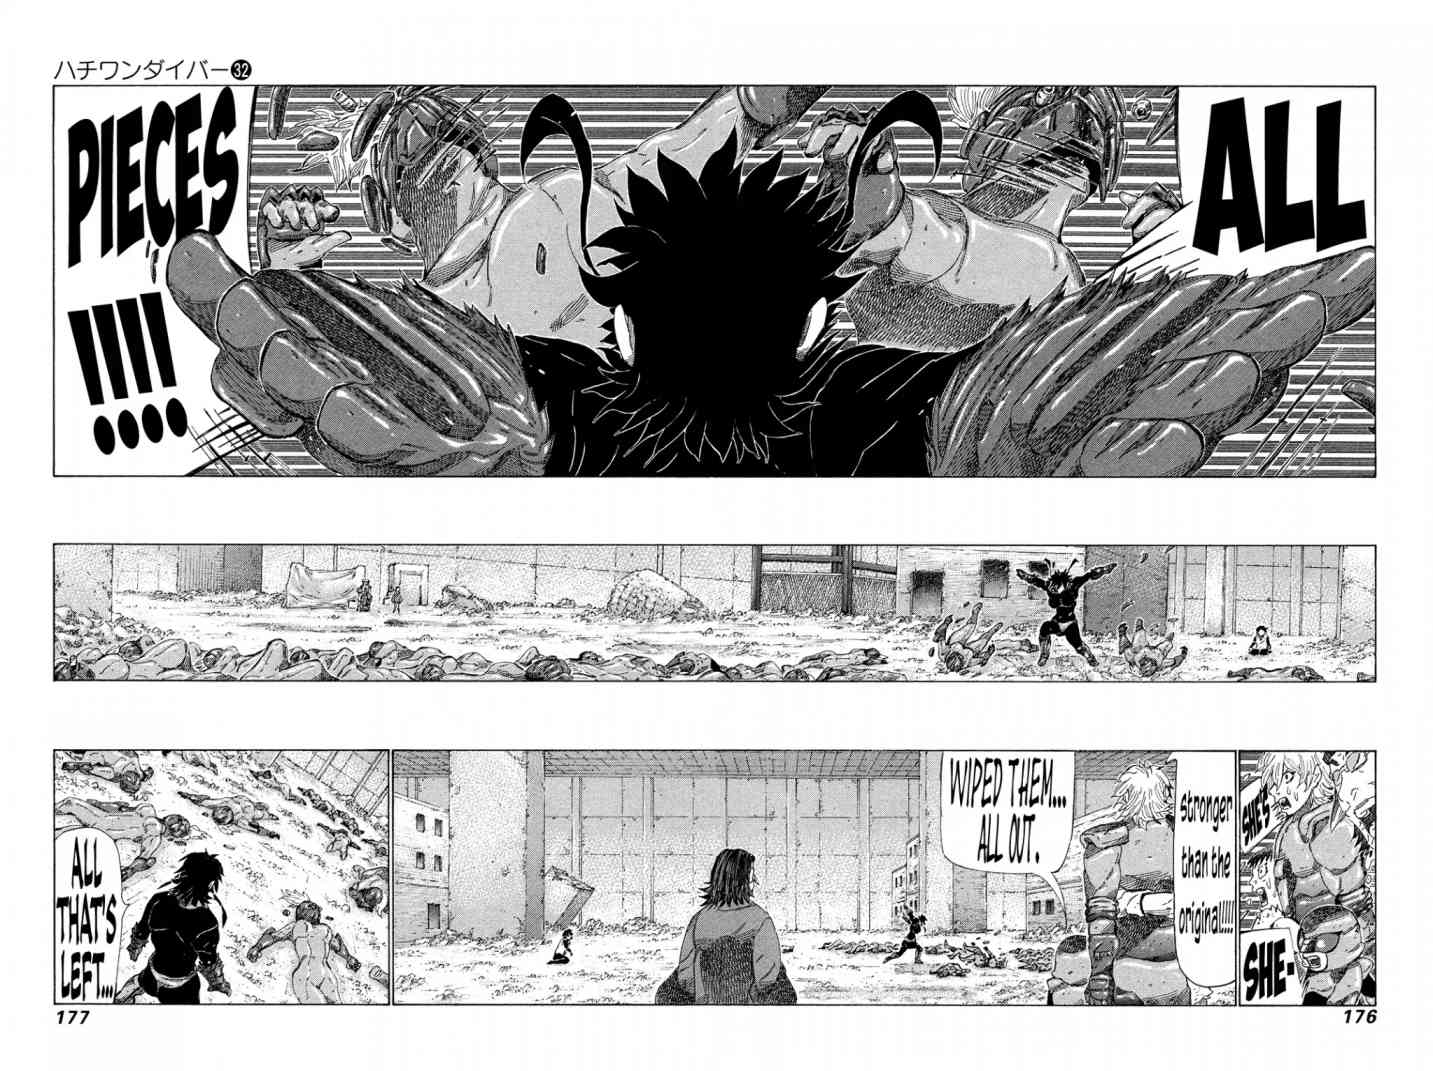 81 Diver Chapter 341 Page 6